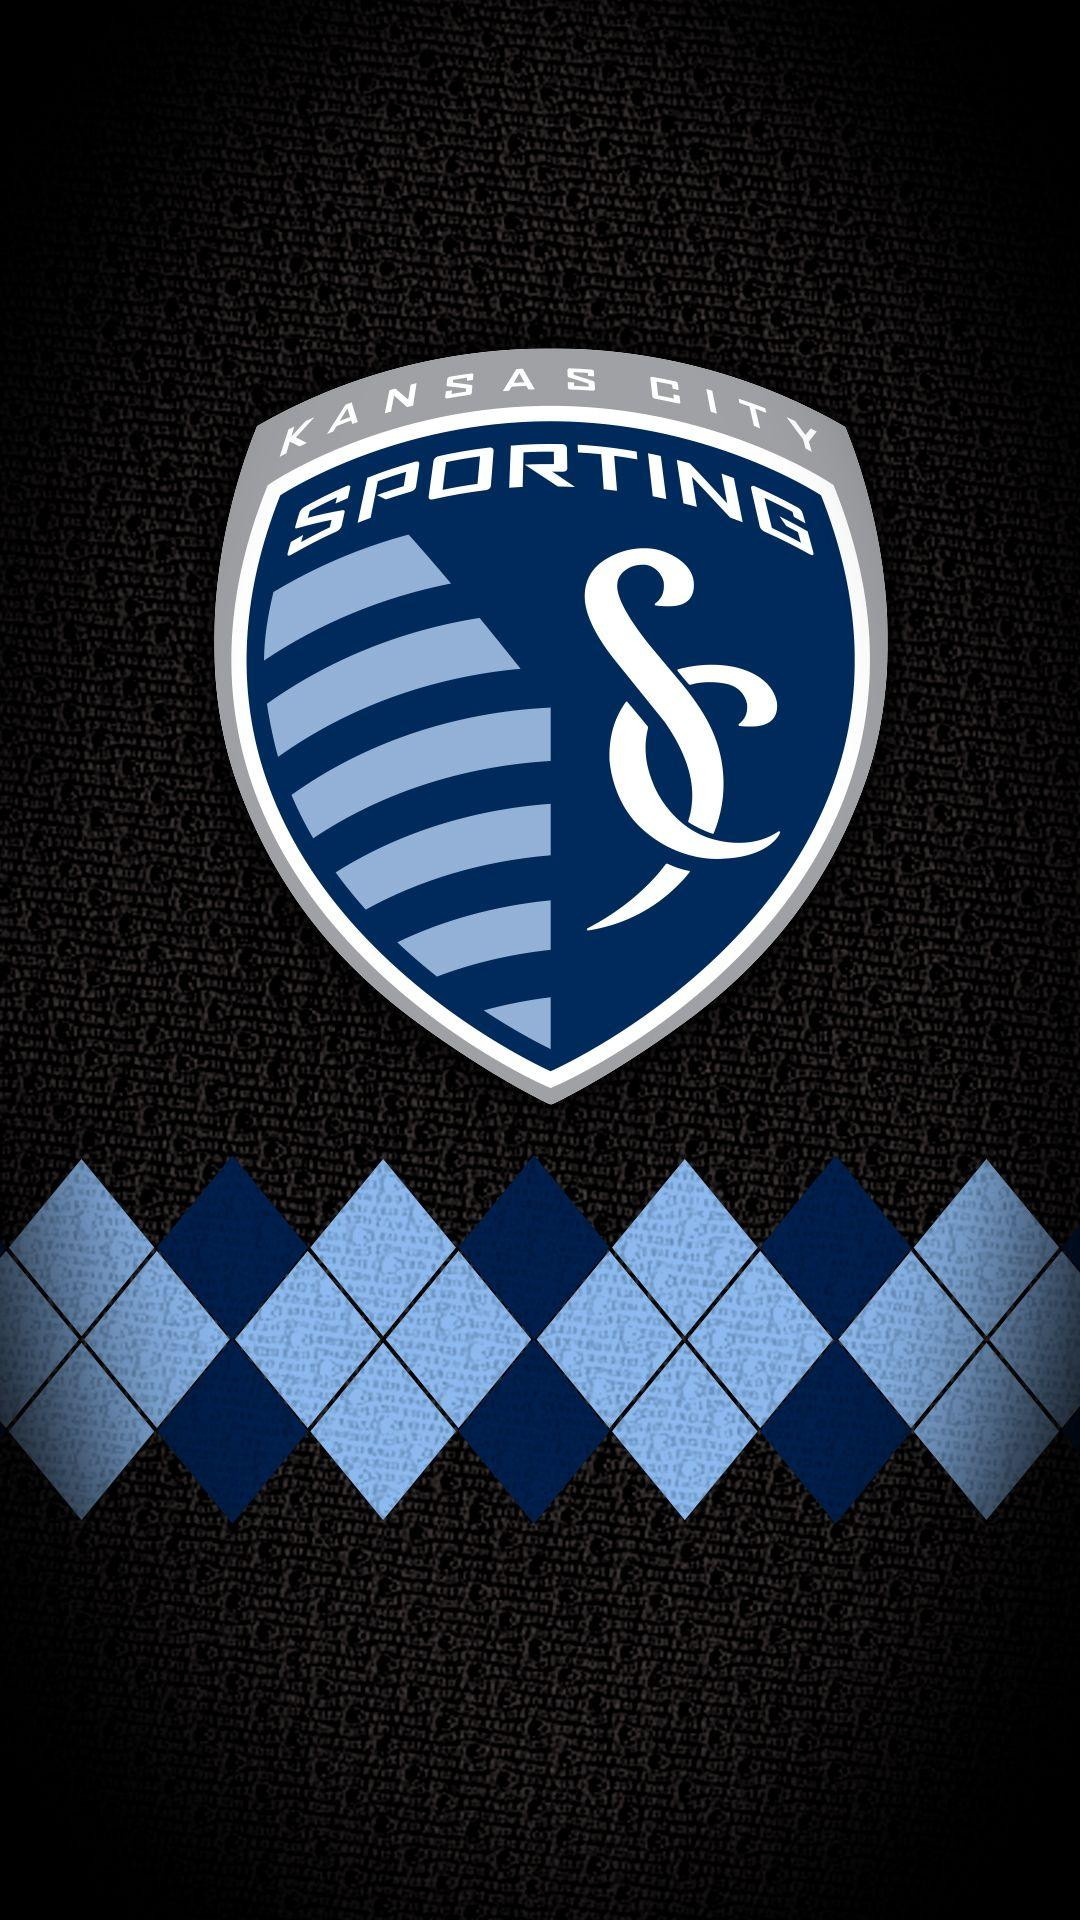 iPhone Wallpaper HD Sporting Kansas City with high-resolution 1080x1920 pixel. You can use this wallpaper for your Desktop Computers, Mac Screensavers, Windows Backgrounds, iPhone Wallpapers, Tablet or Android Lock screen and another Mobile device